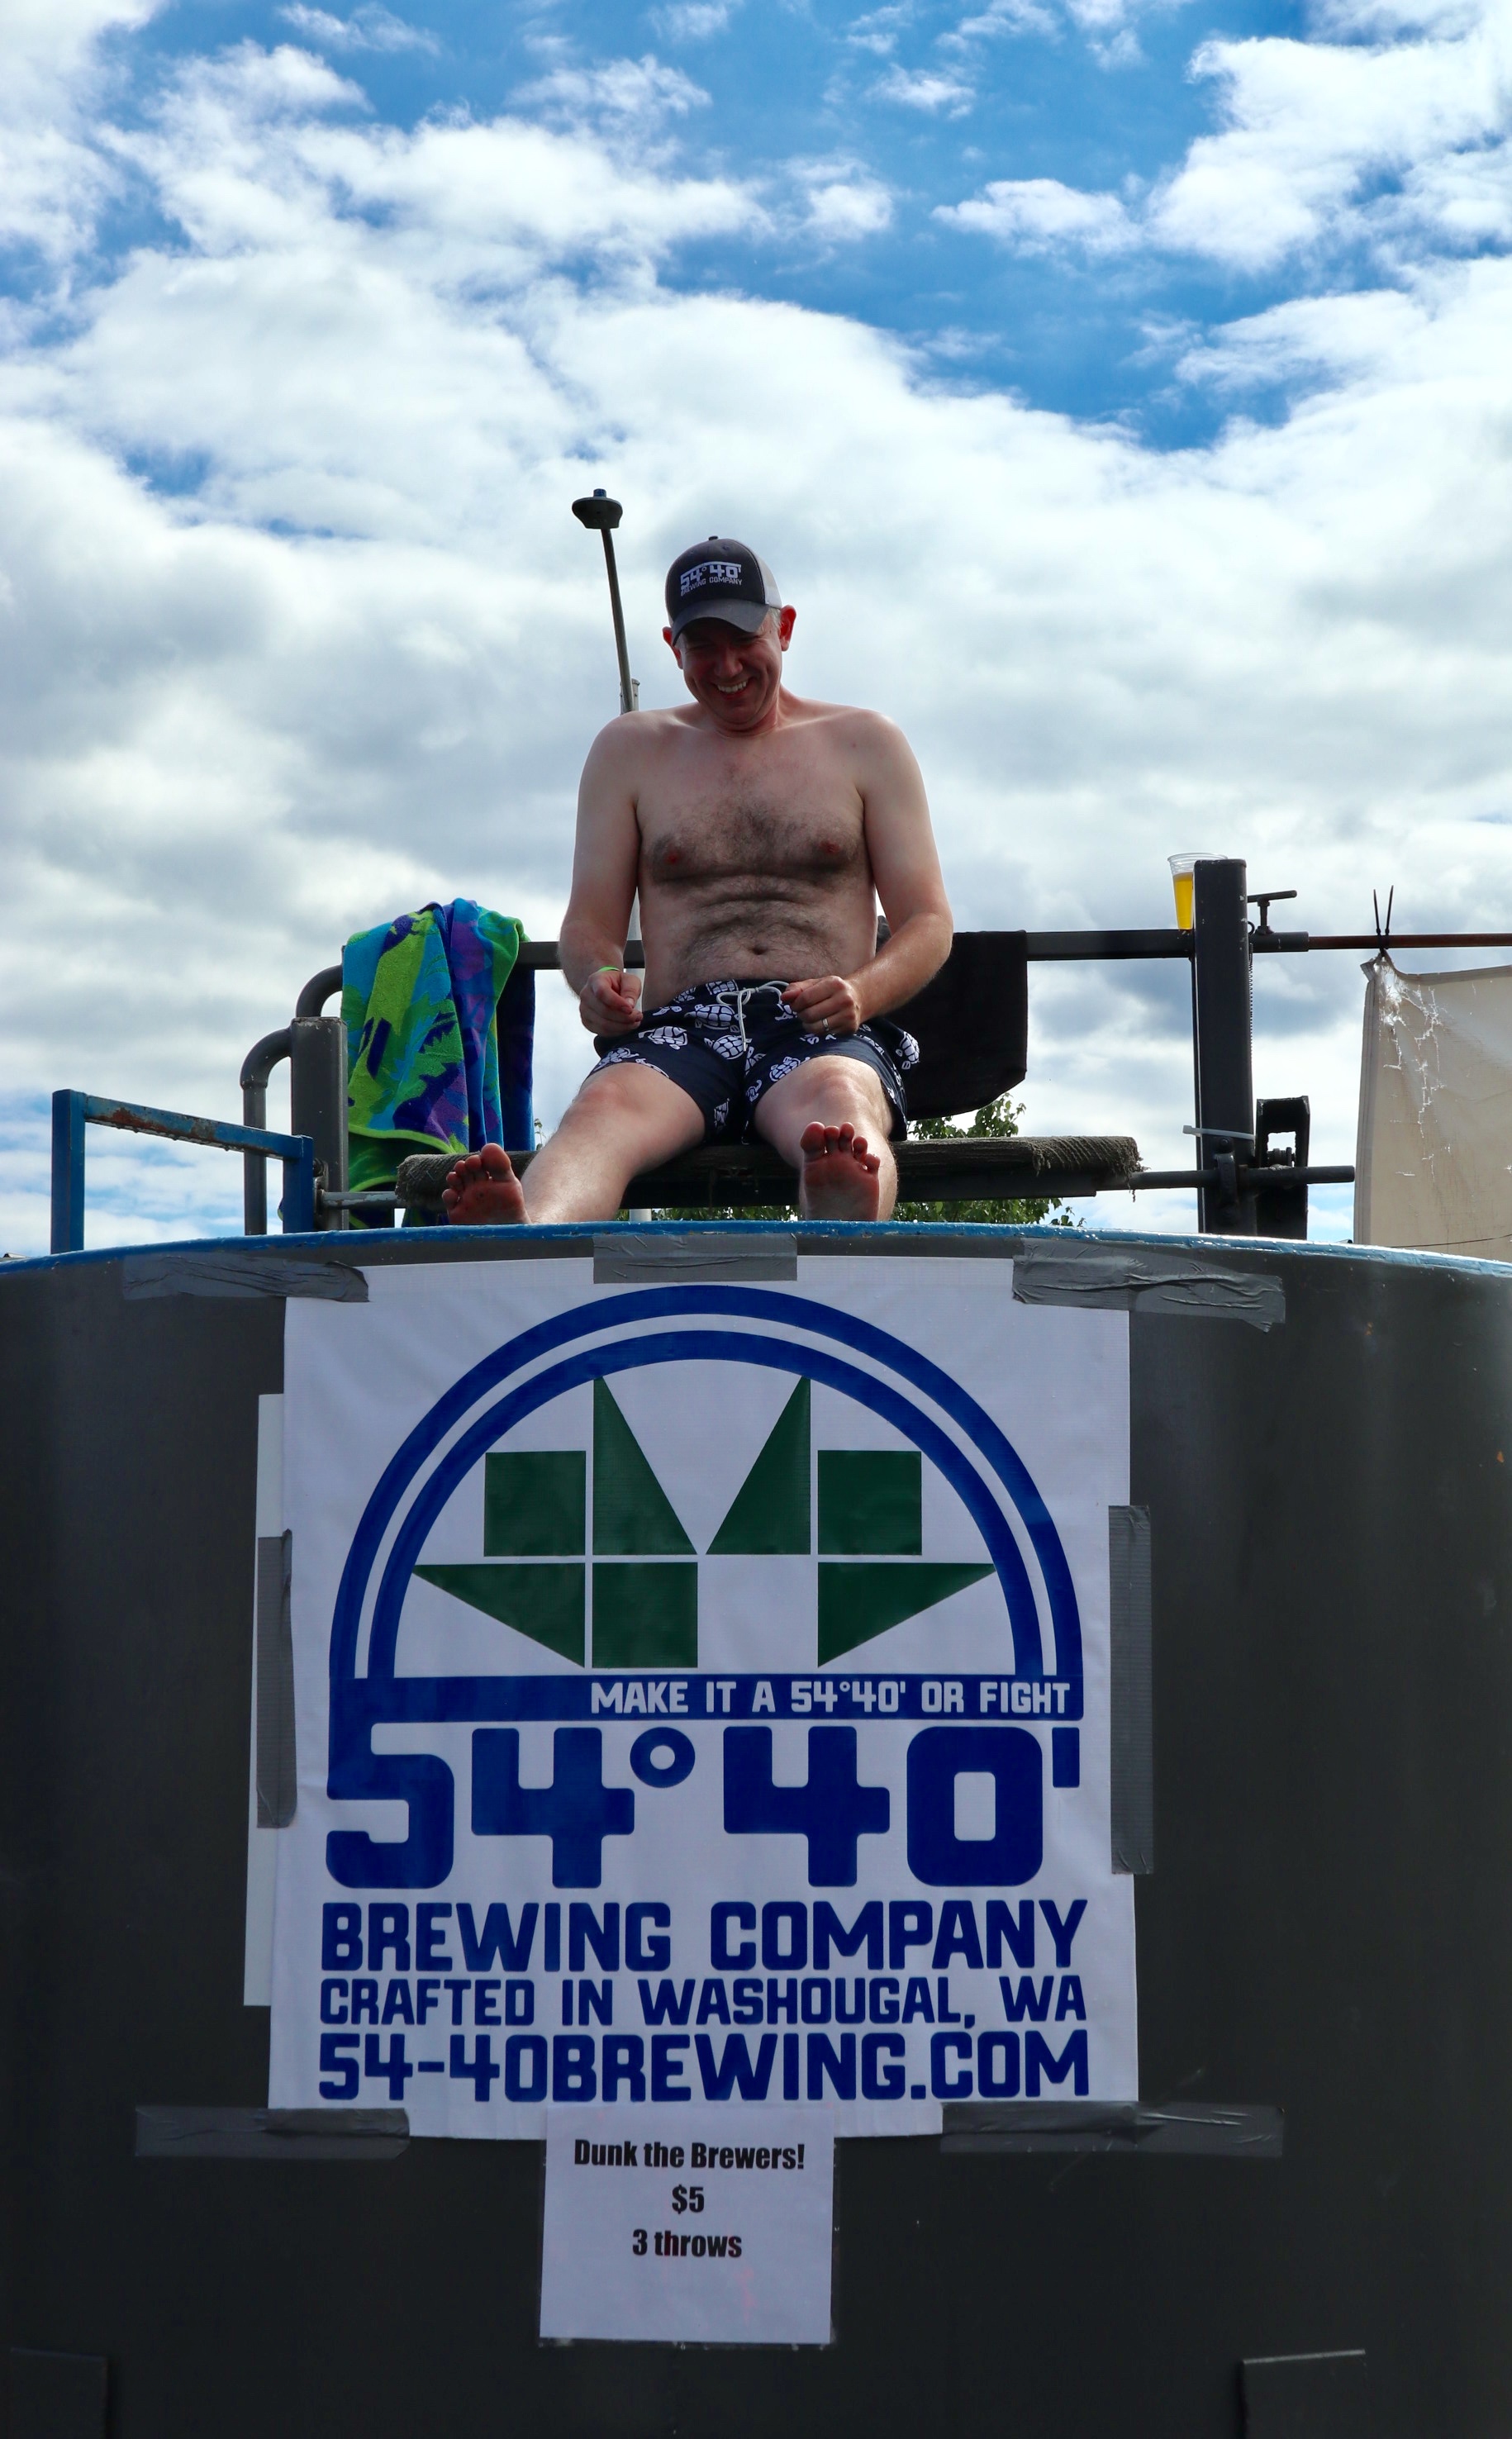 Bolt Minister, owner and brewmaster at 54°40' Brewing Co. in the Brewers Dunk Tank.